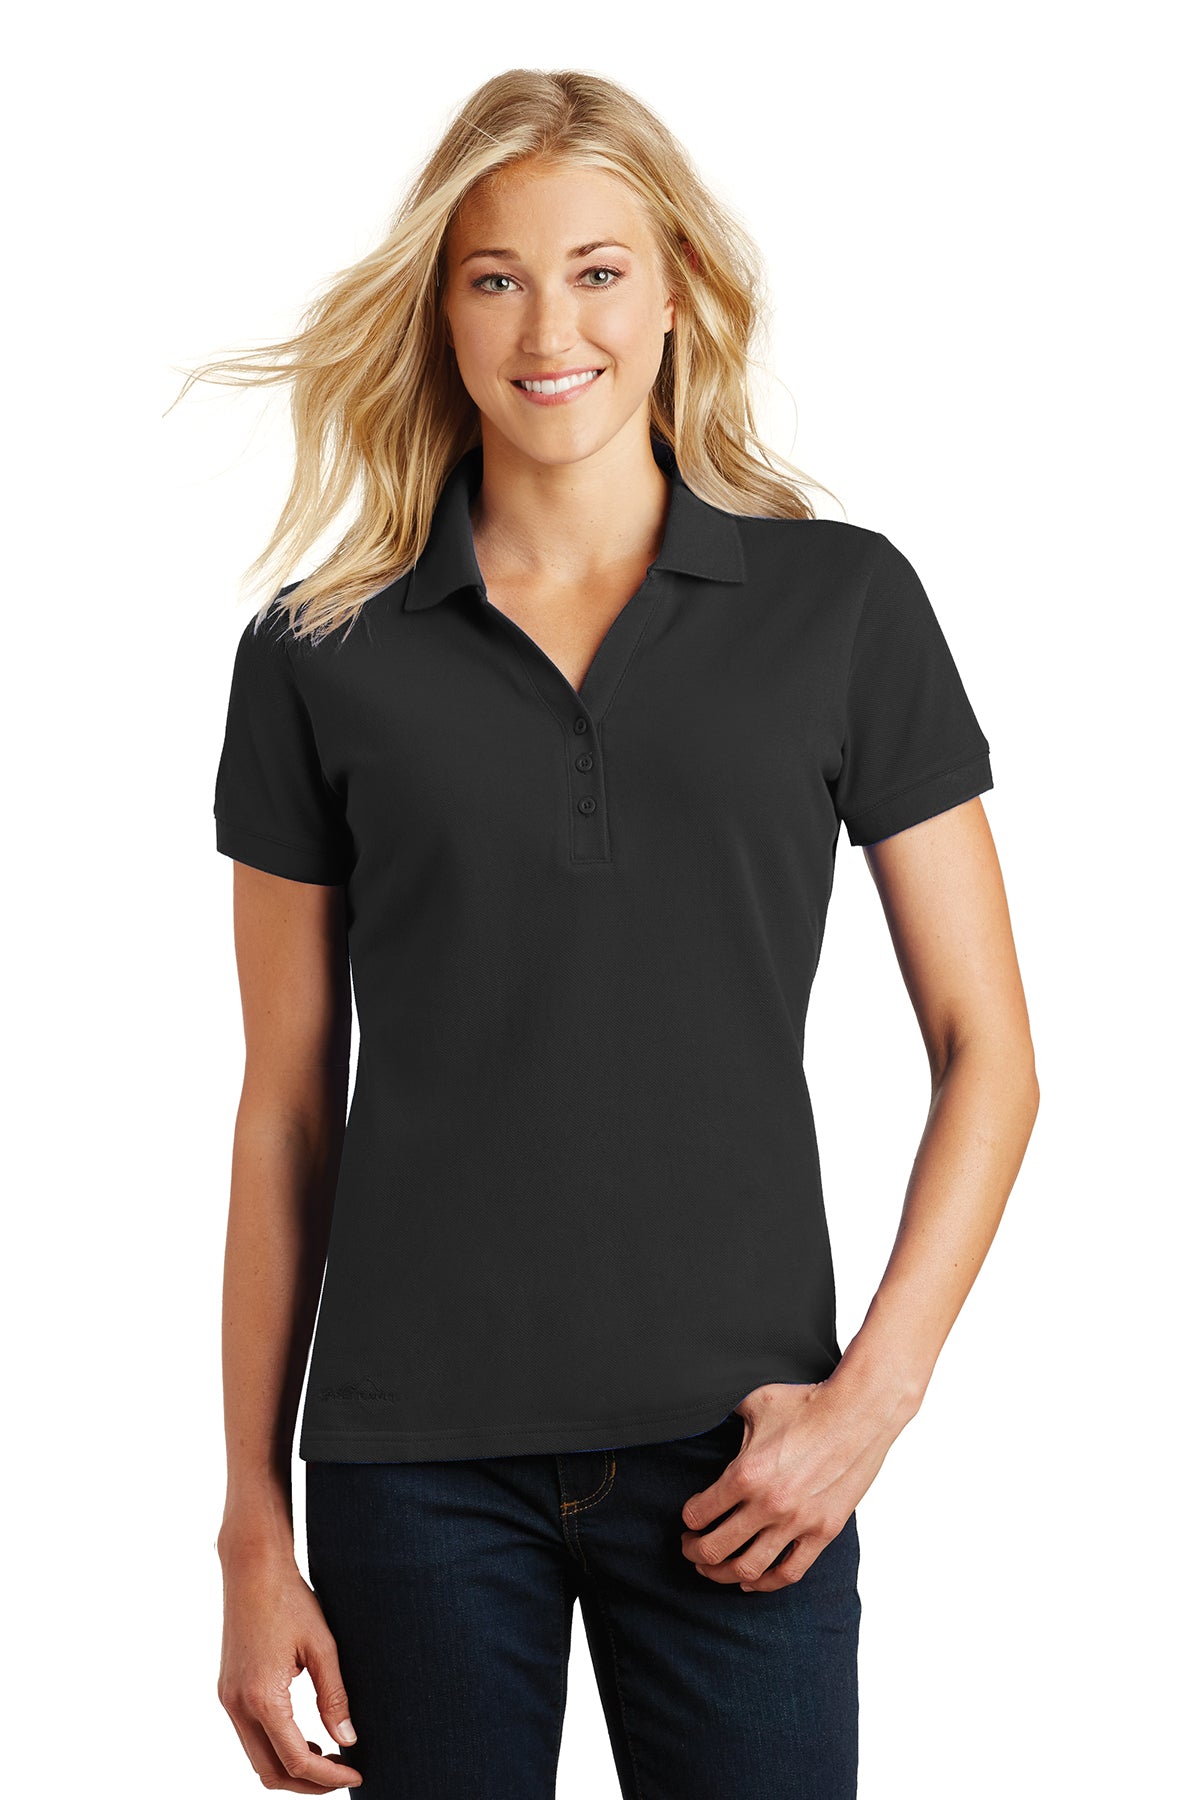 LL Two Oars (Embroidered) Women's Eddie Bauer golf polo